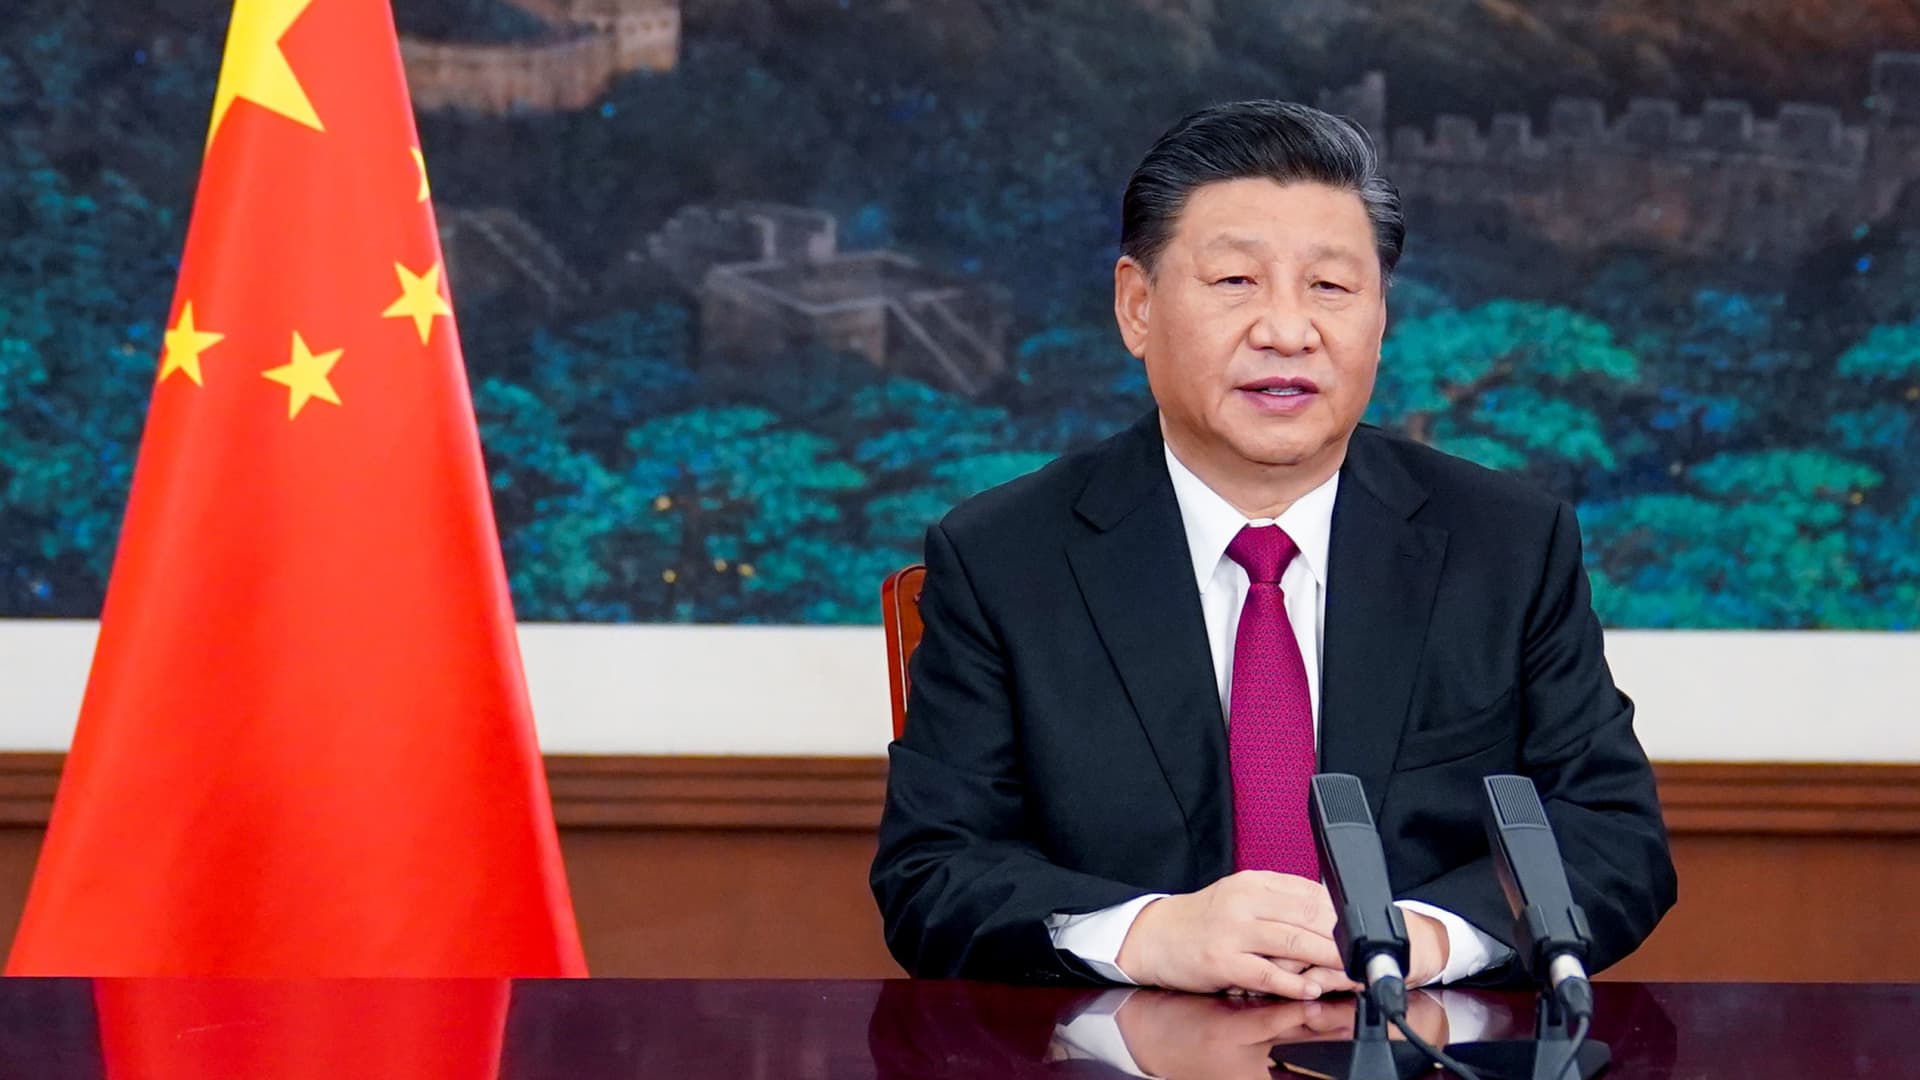 Chinese President Xi Jinping attends the World Economic Forum WEF Virtual Event of the Davos Agenda and delivers a special address via video link in Beijing, capital of China, Jan. 25, 2021.